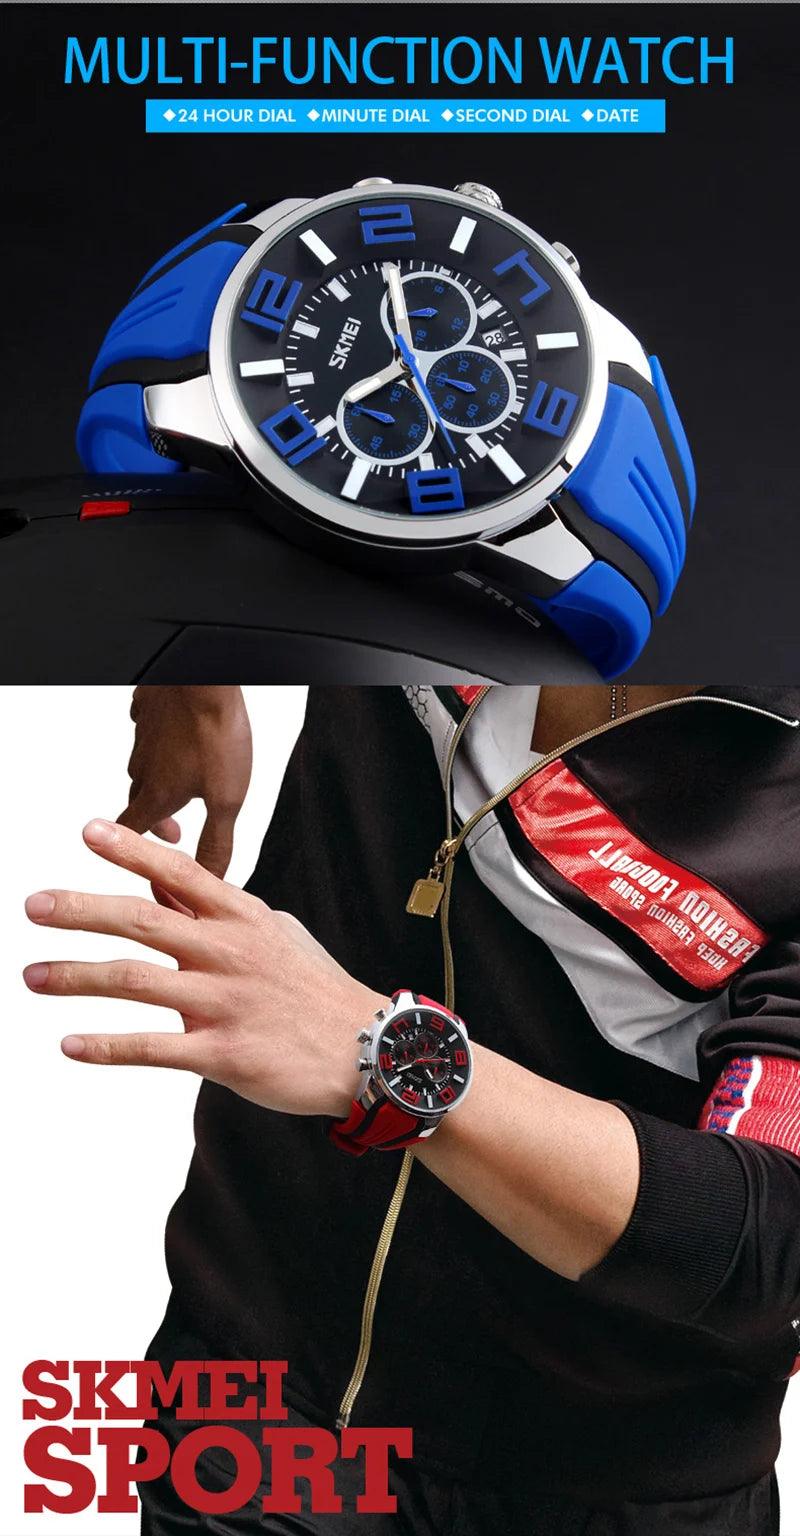 New Arrival Luxury Brand Chronograph Watches for Men - Waterproof Male Quartz Sports Watches - The Jewellery Supermarket